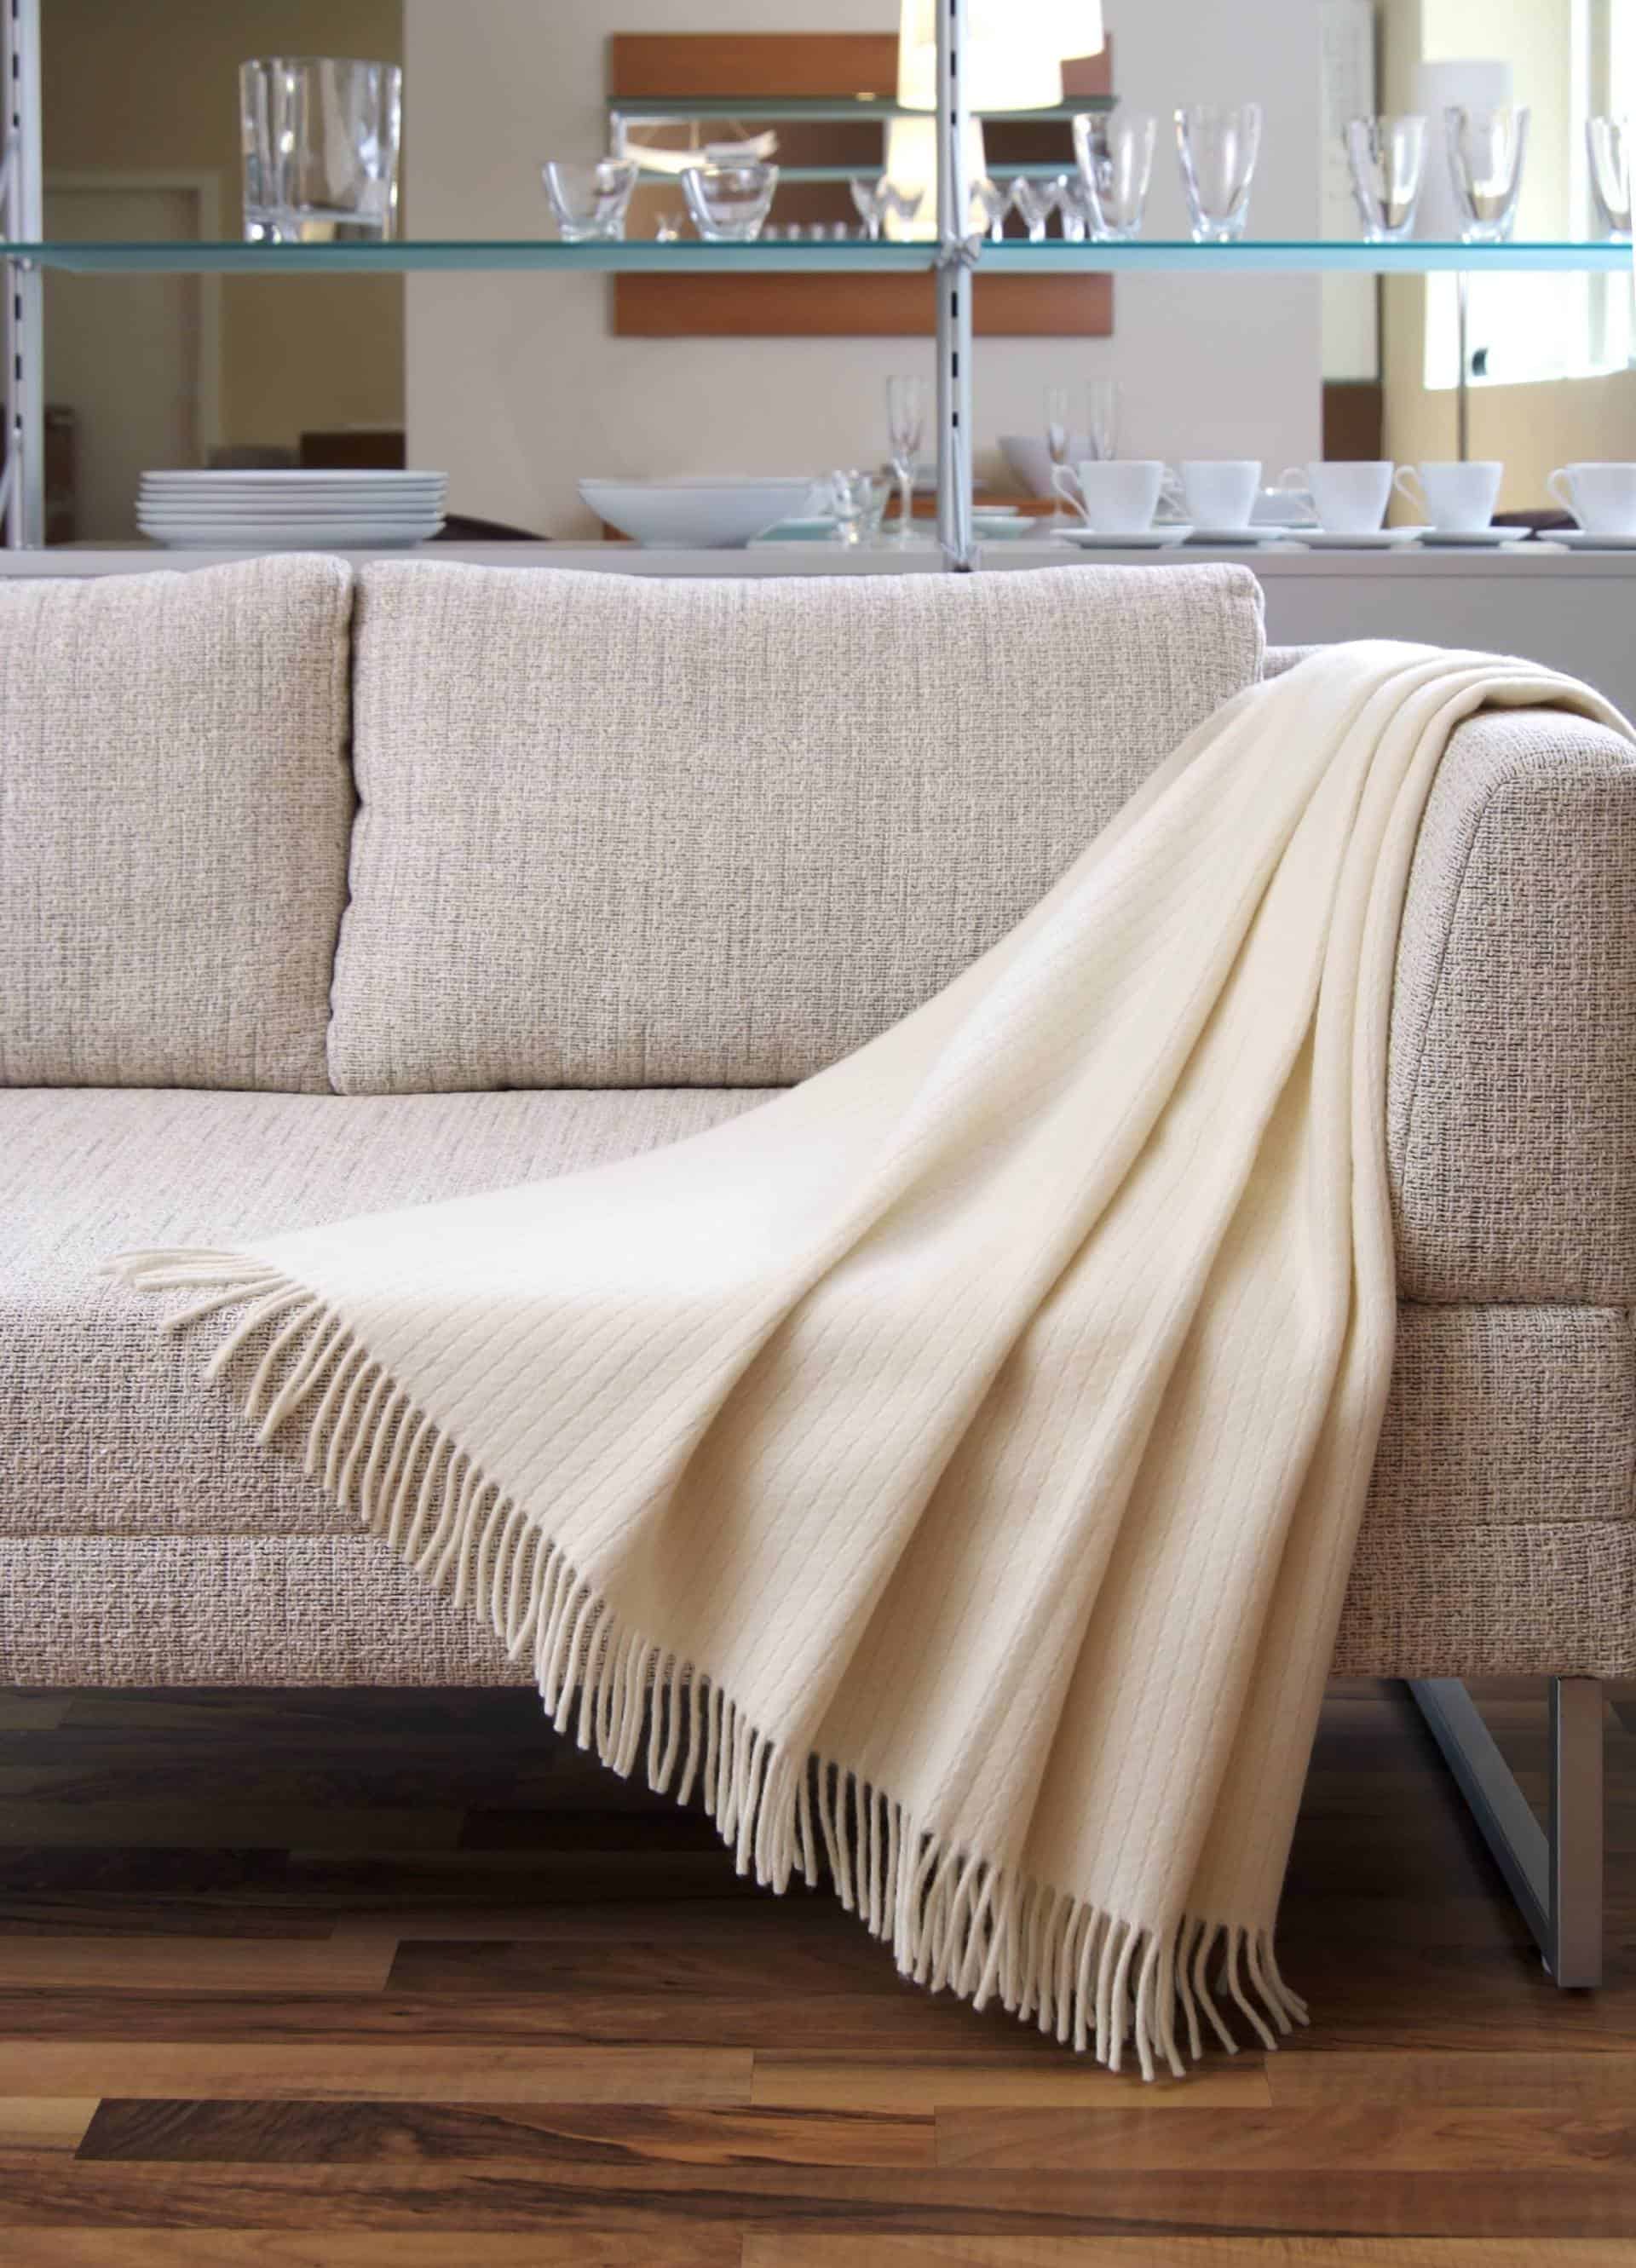 Blanket draped over a settee photo description example